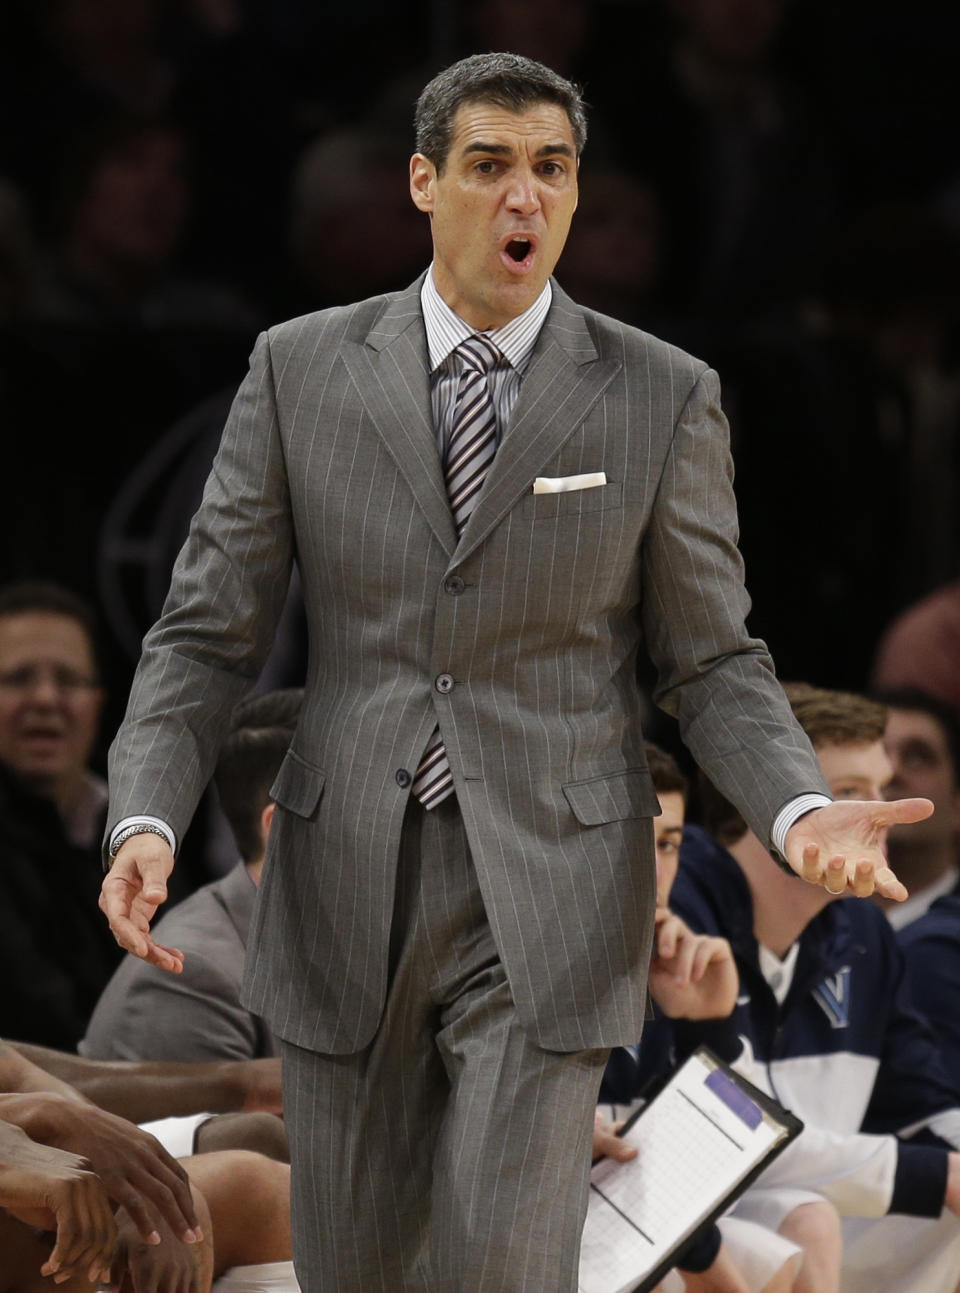 Villanova head coach Jay Wright yells during the first half of an NCAA college basketball game against Seton Hall in the second round of the Big East Conference tournament at Madison Square Garden, Thursday, March 13, 2014, in New York. (AP Photo/Seth Wenig)